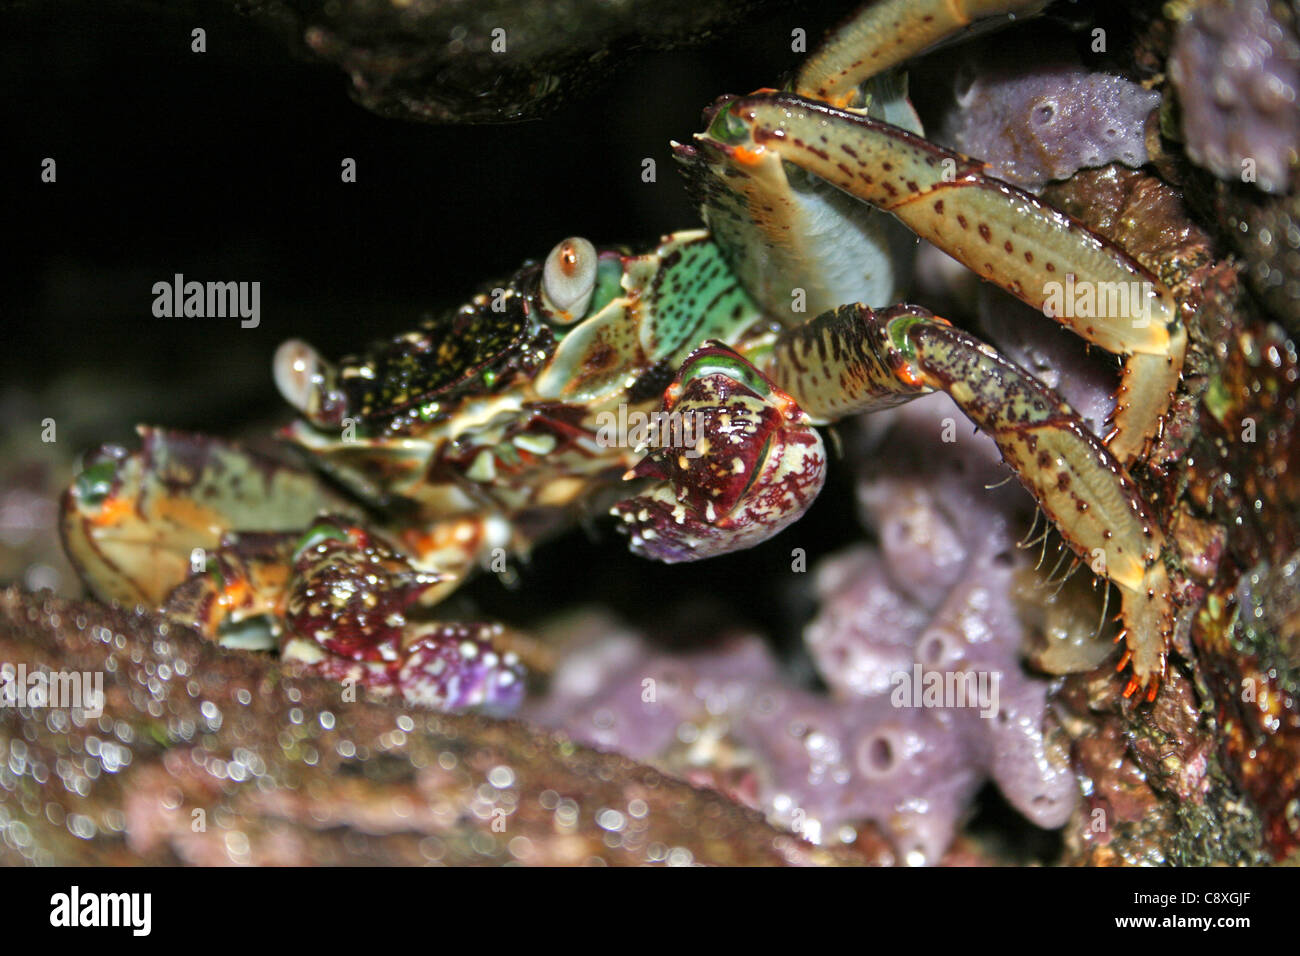 Brightly Coloured Crab Hiding In A Rock Pool Crevice On Bali Stock Photo